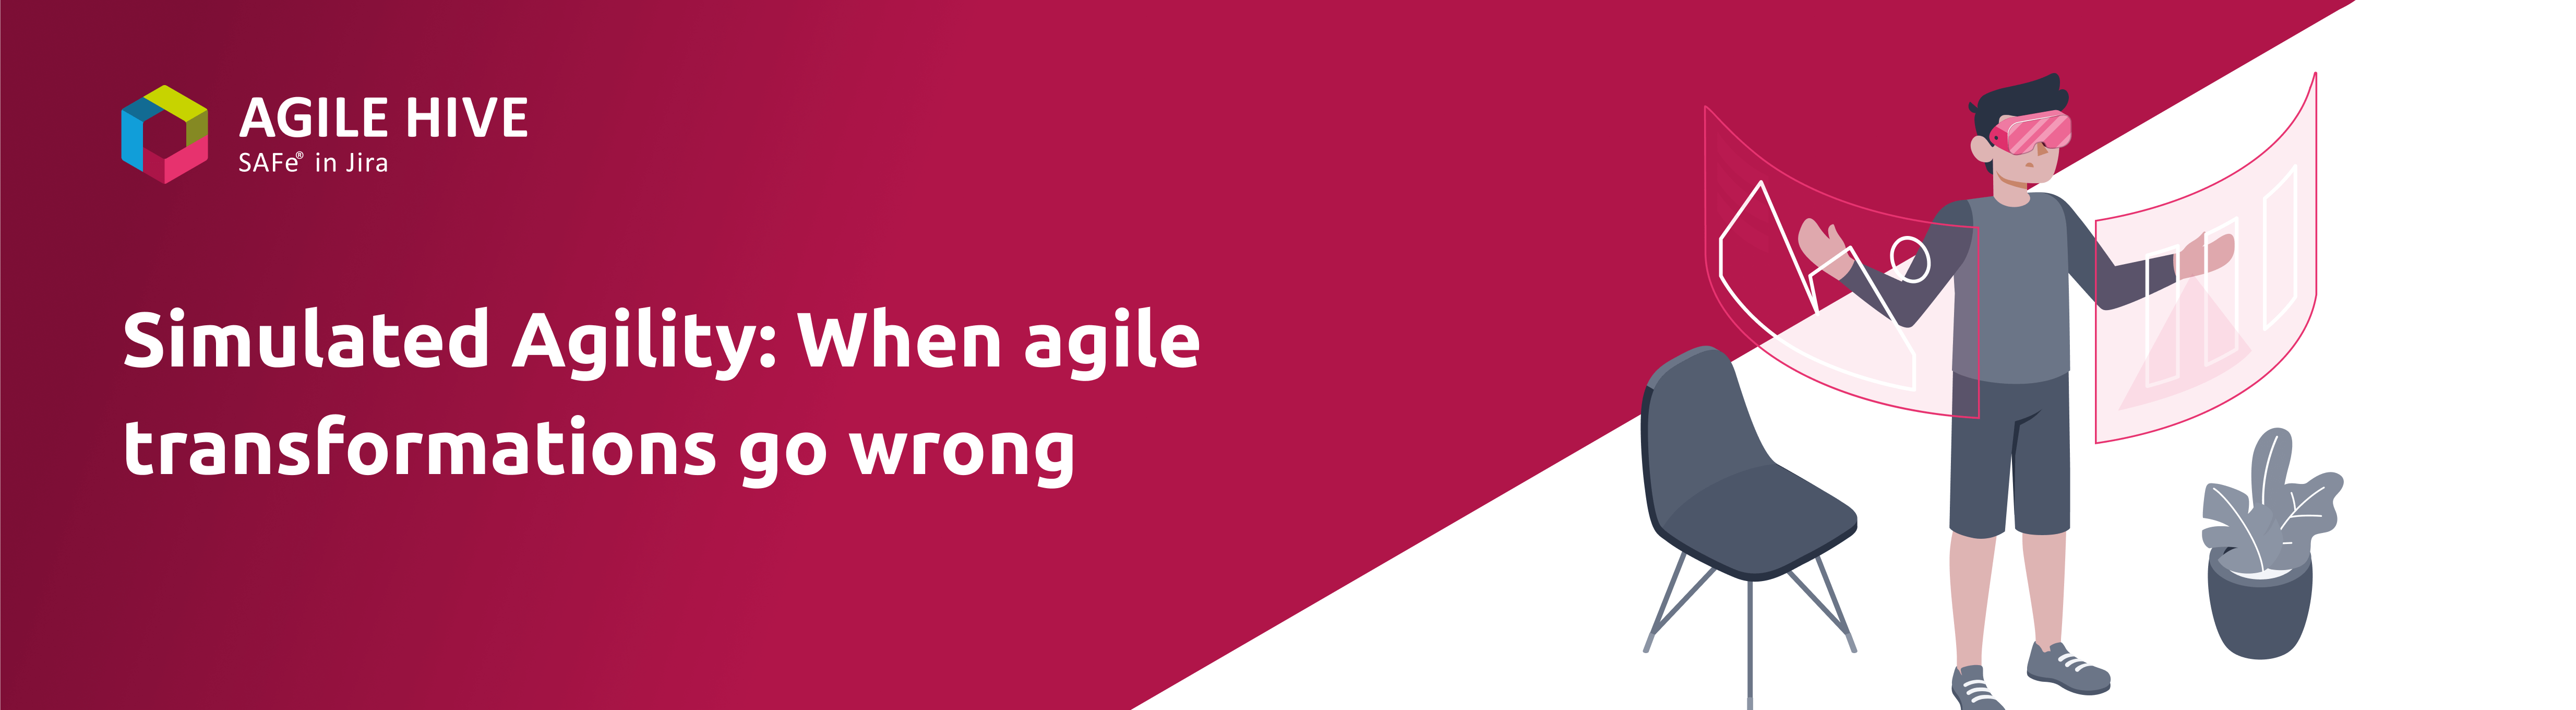 Simulated Agility: When agile transformations go wrong - banner